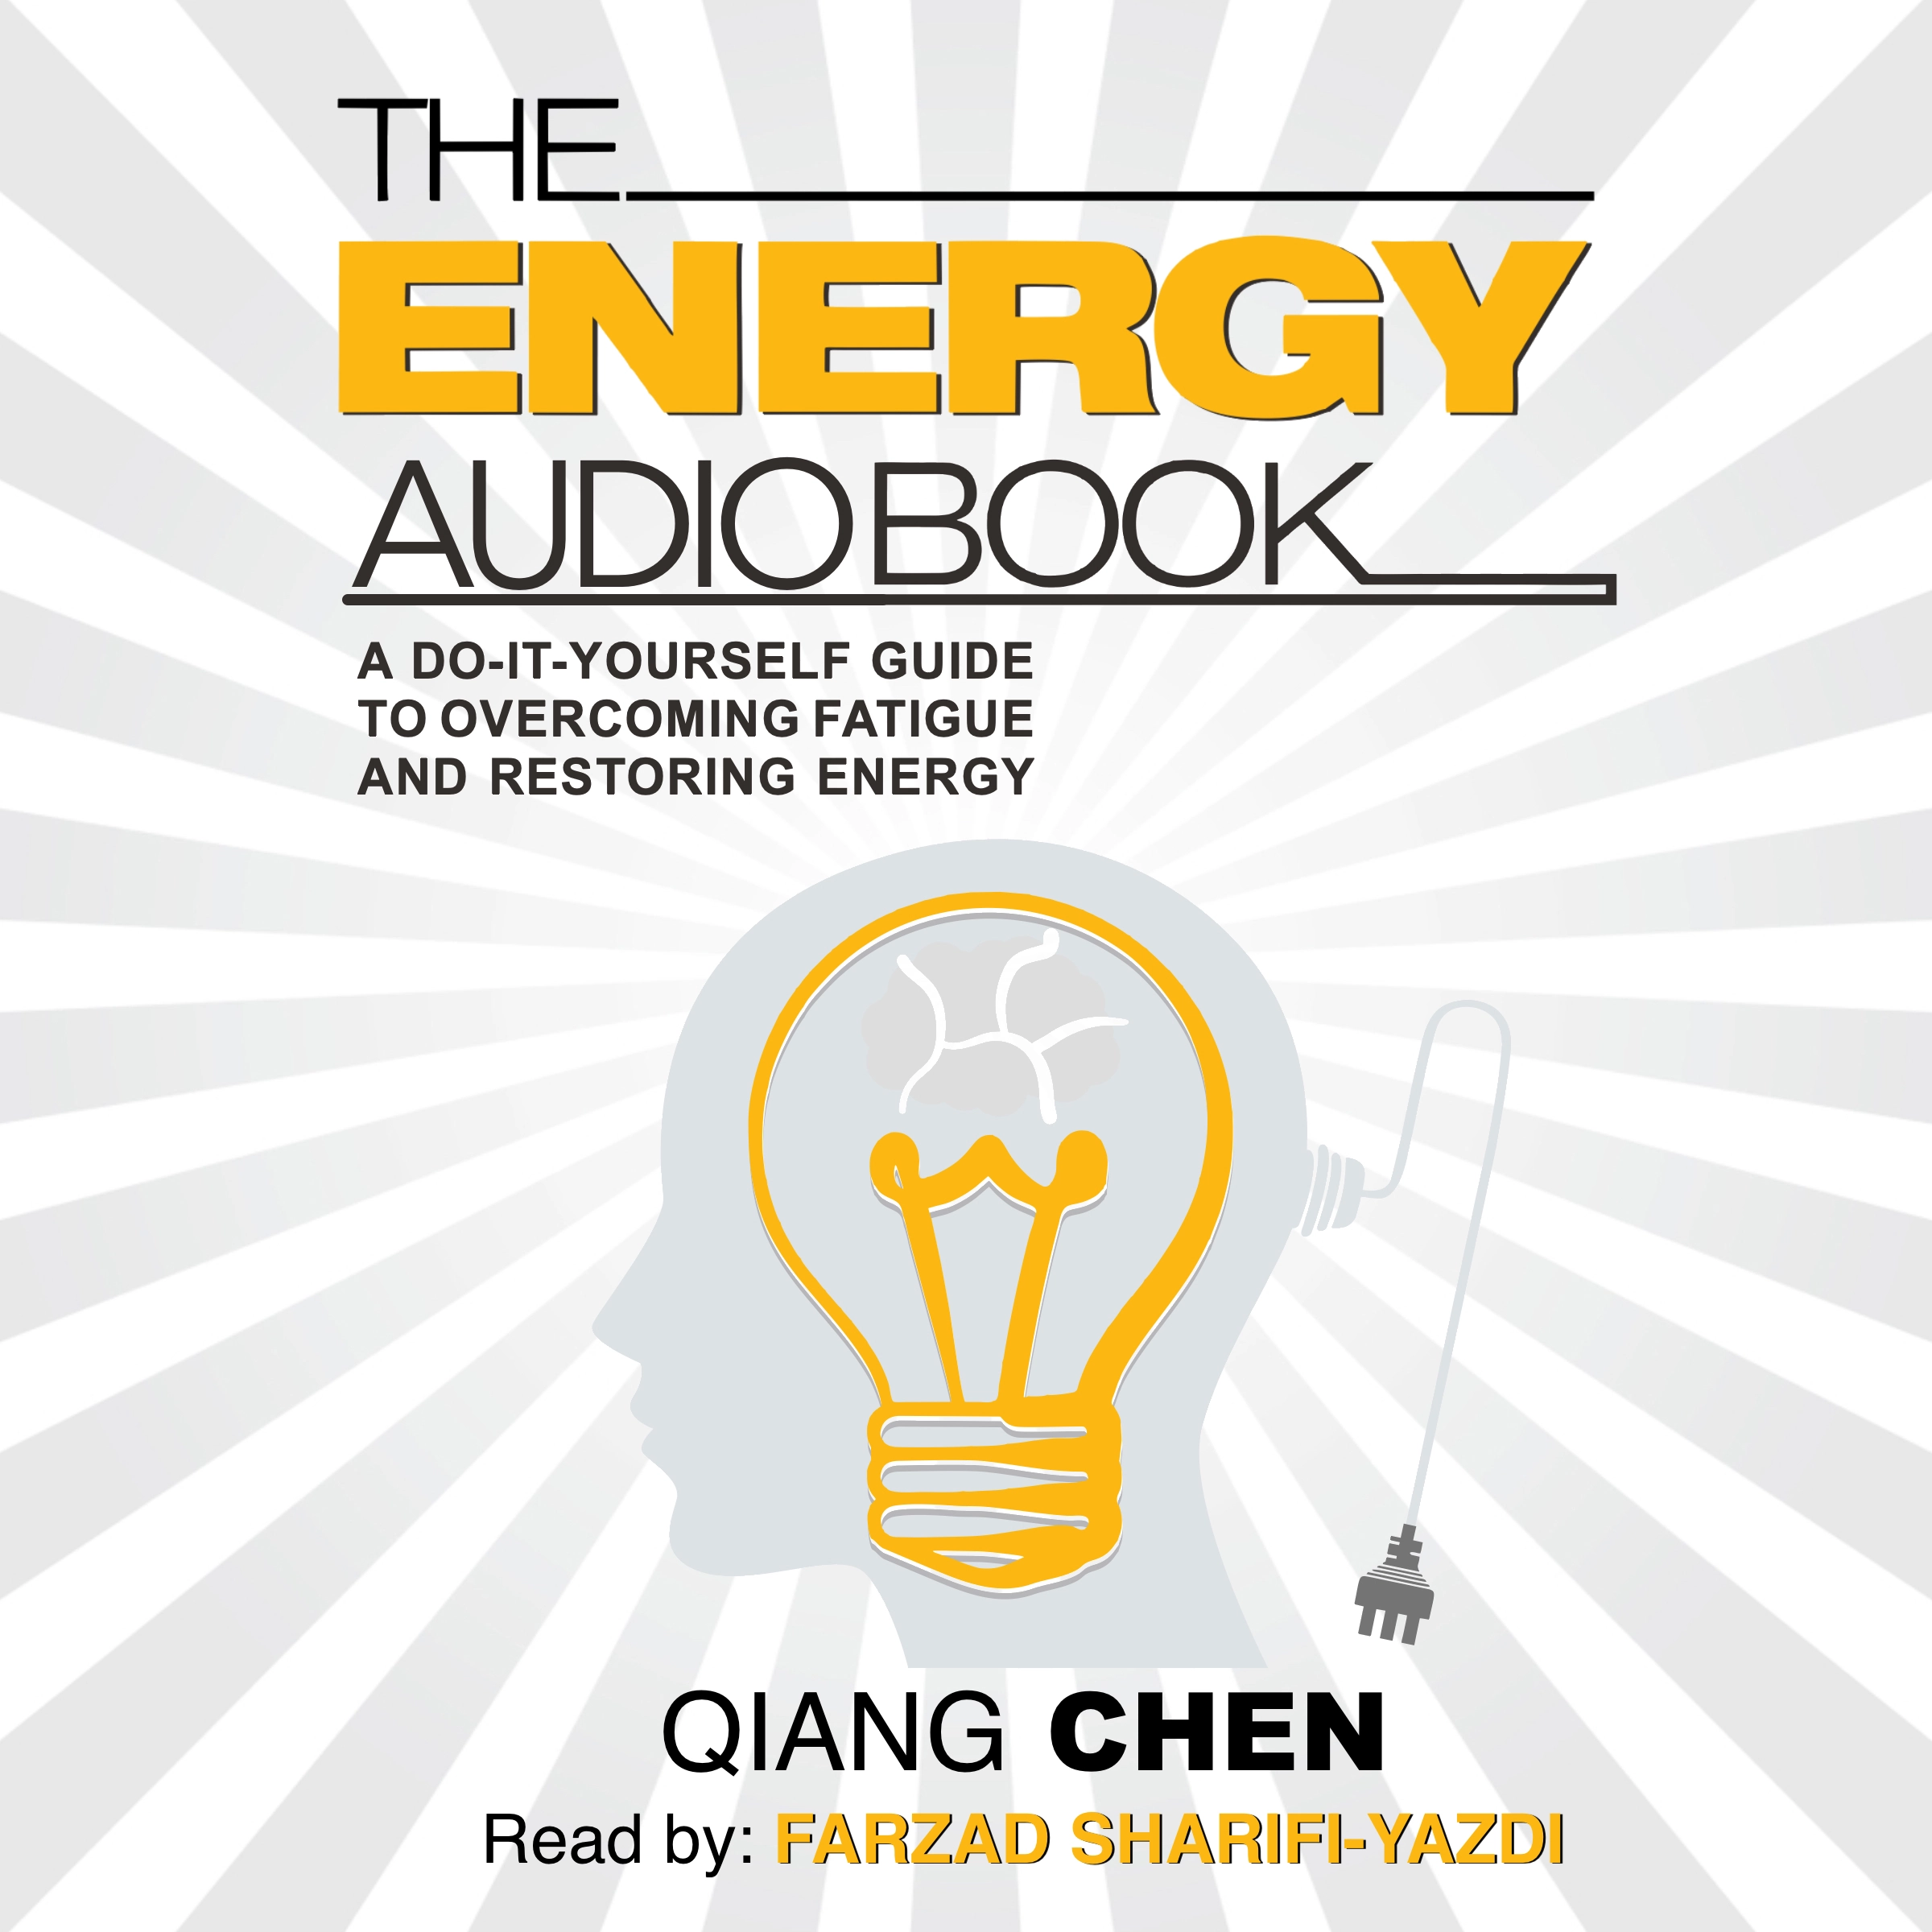 The Energy Audiobook Audiobook by Qiang Chen